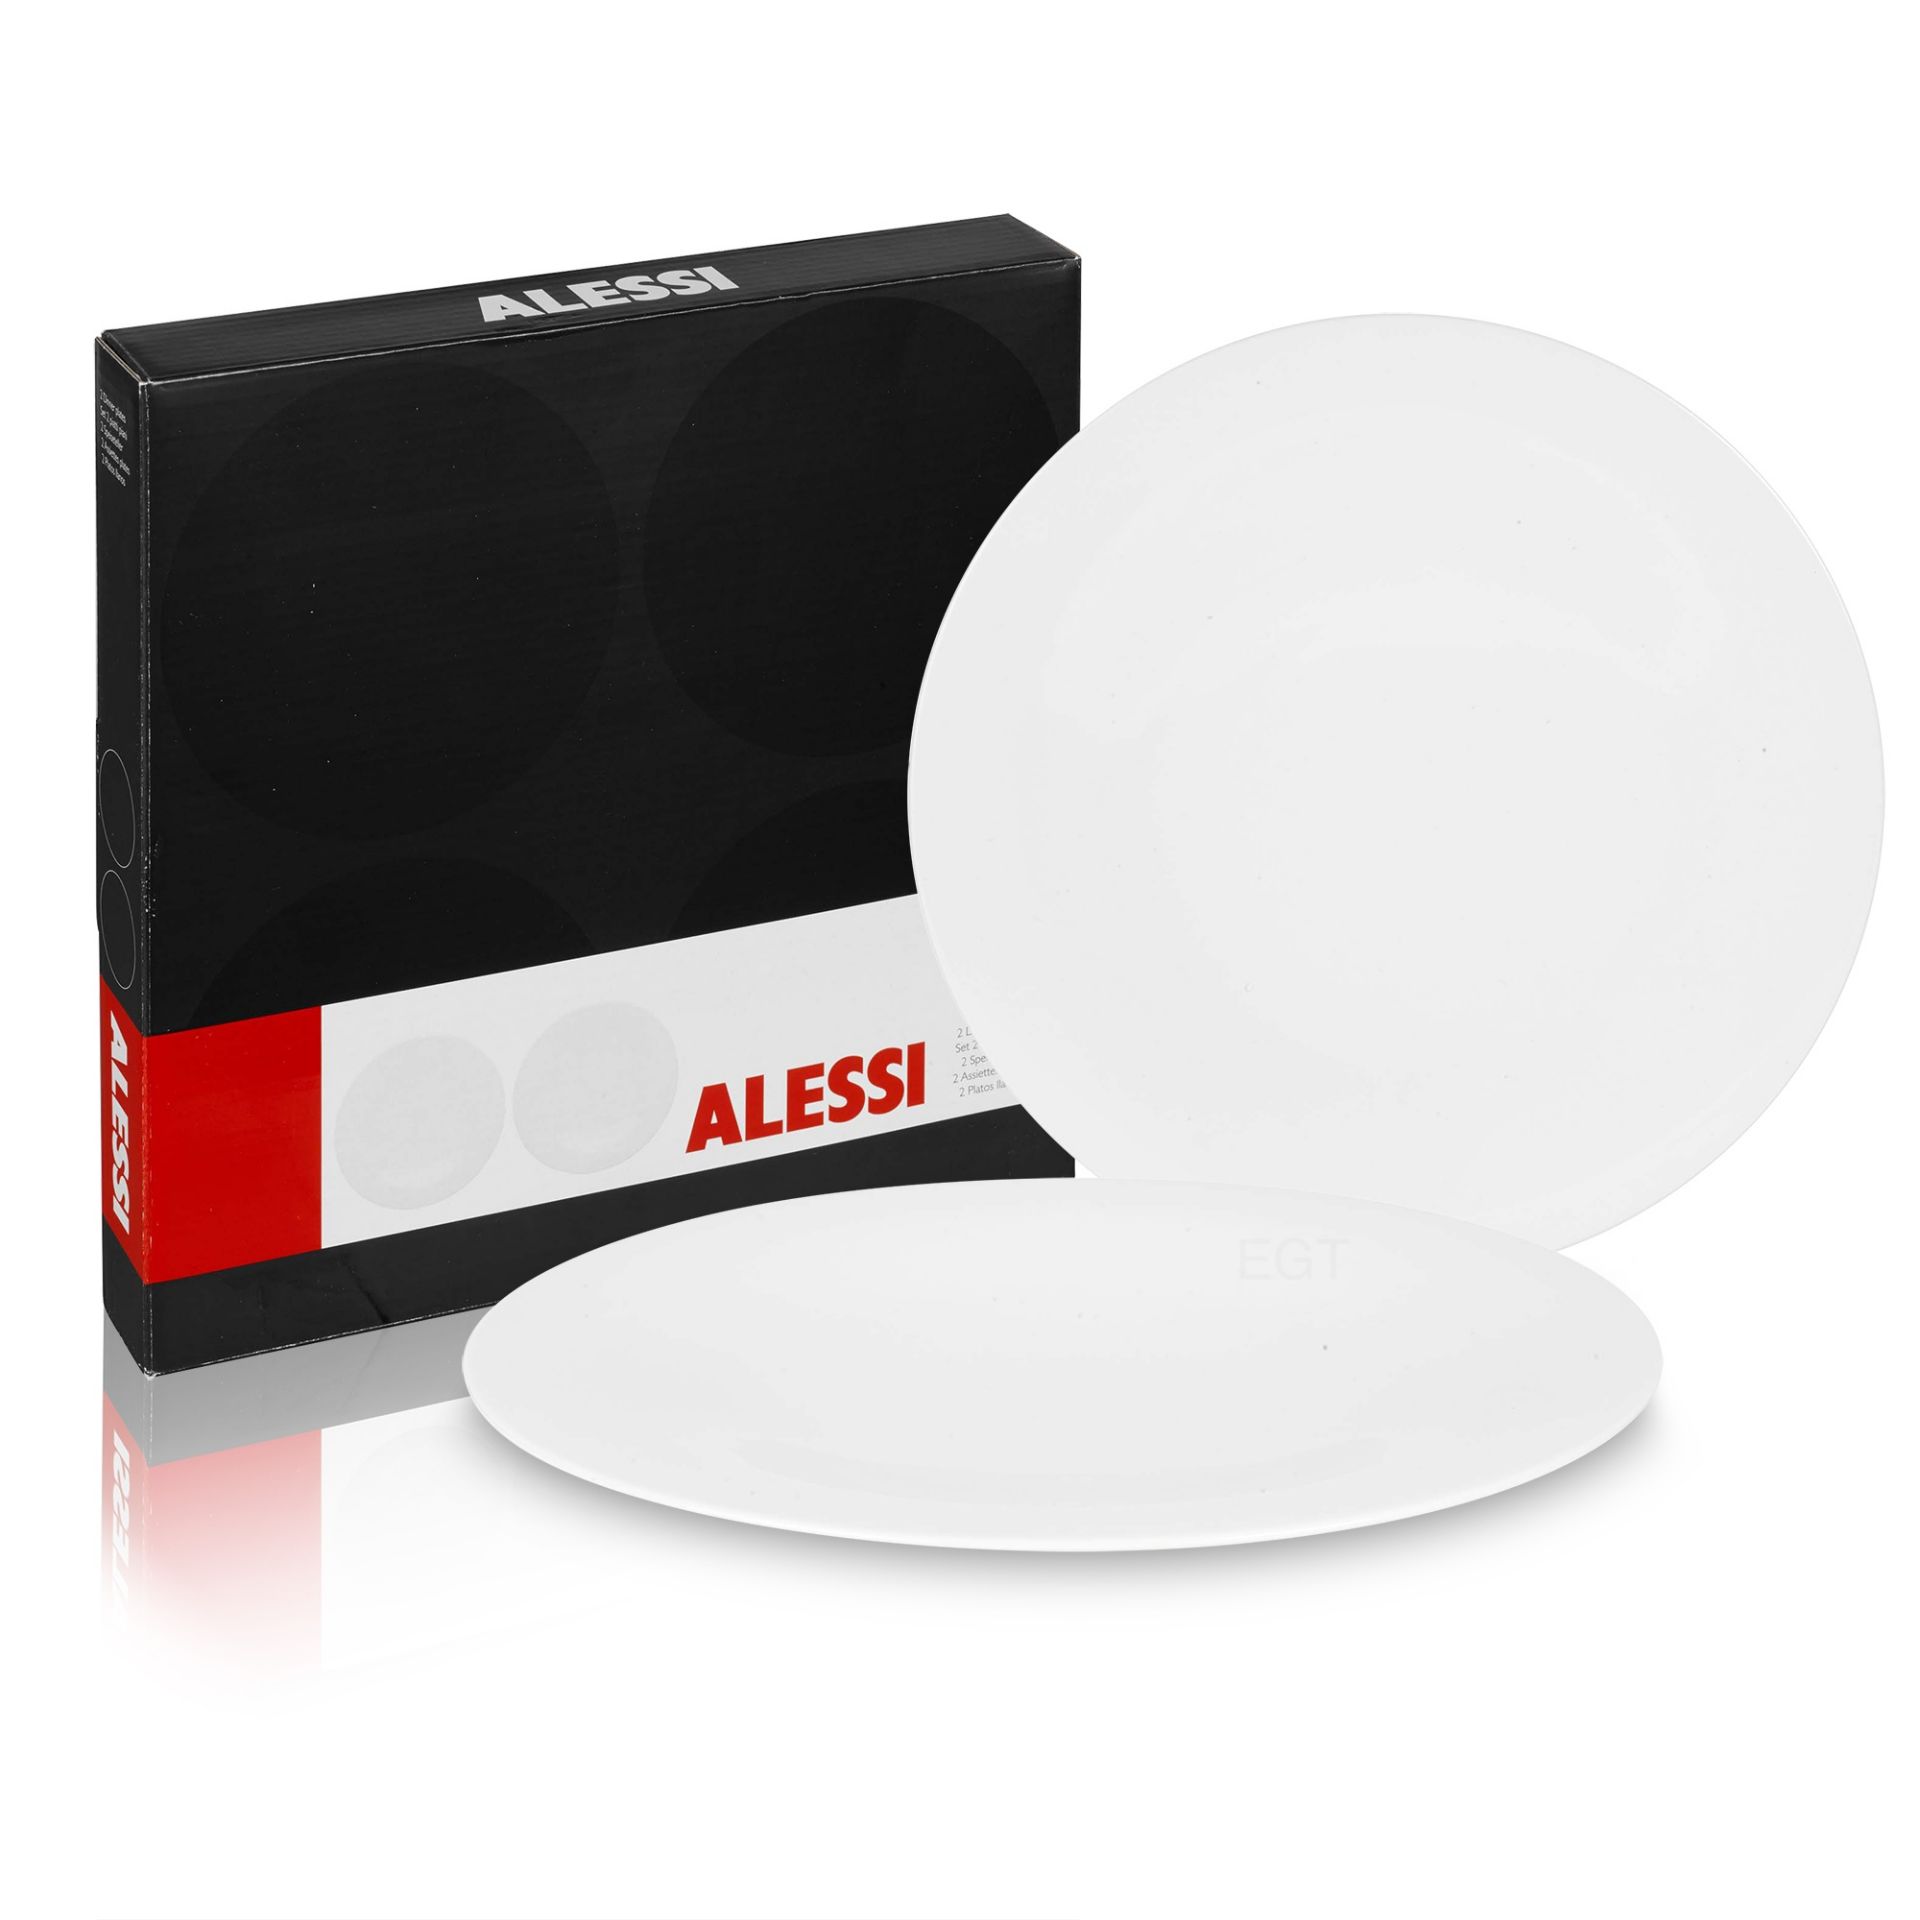 V Brand New Alessi Ku Set of Two Dinner Plates (£19.99 www.easygiftproducts.co.uk) X 2 YOUR BID